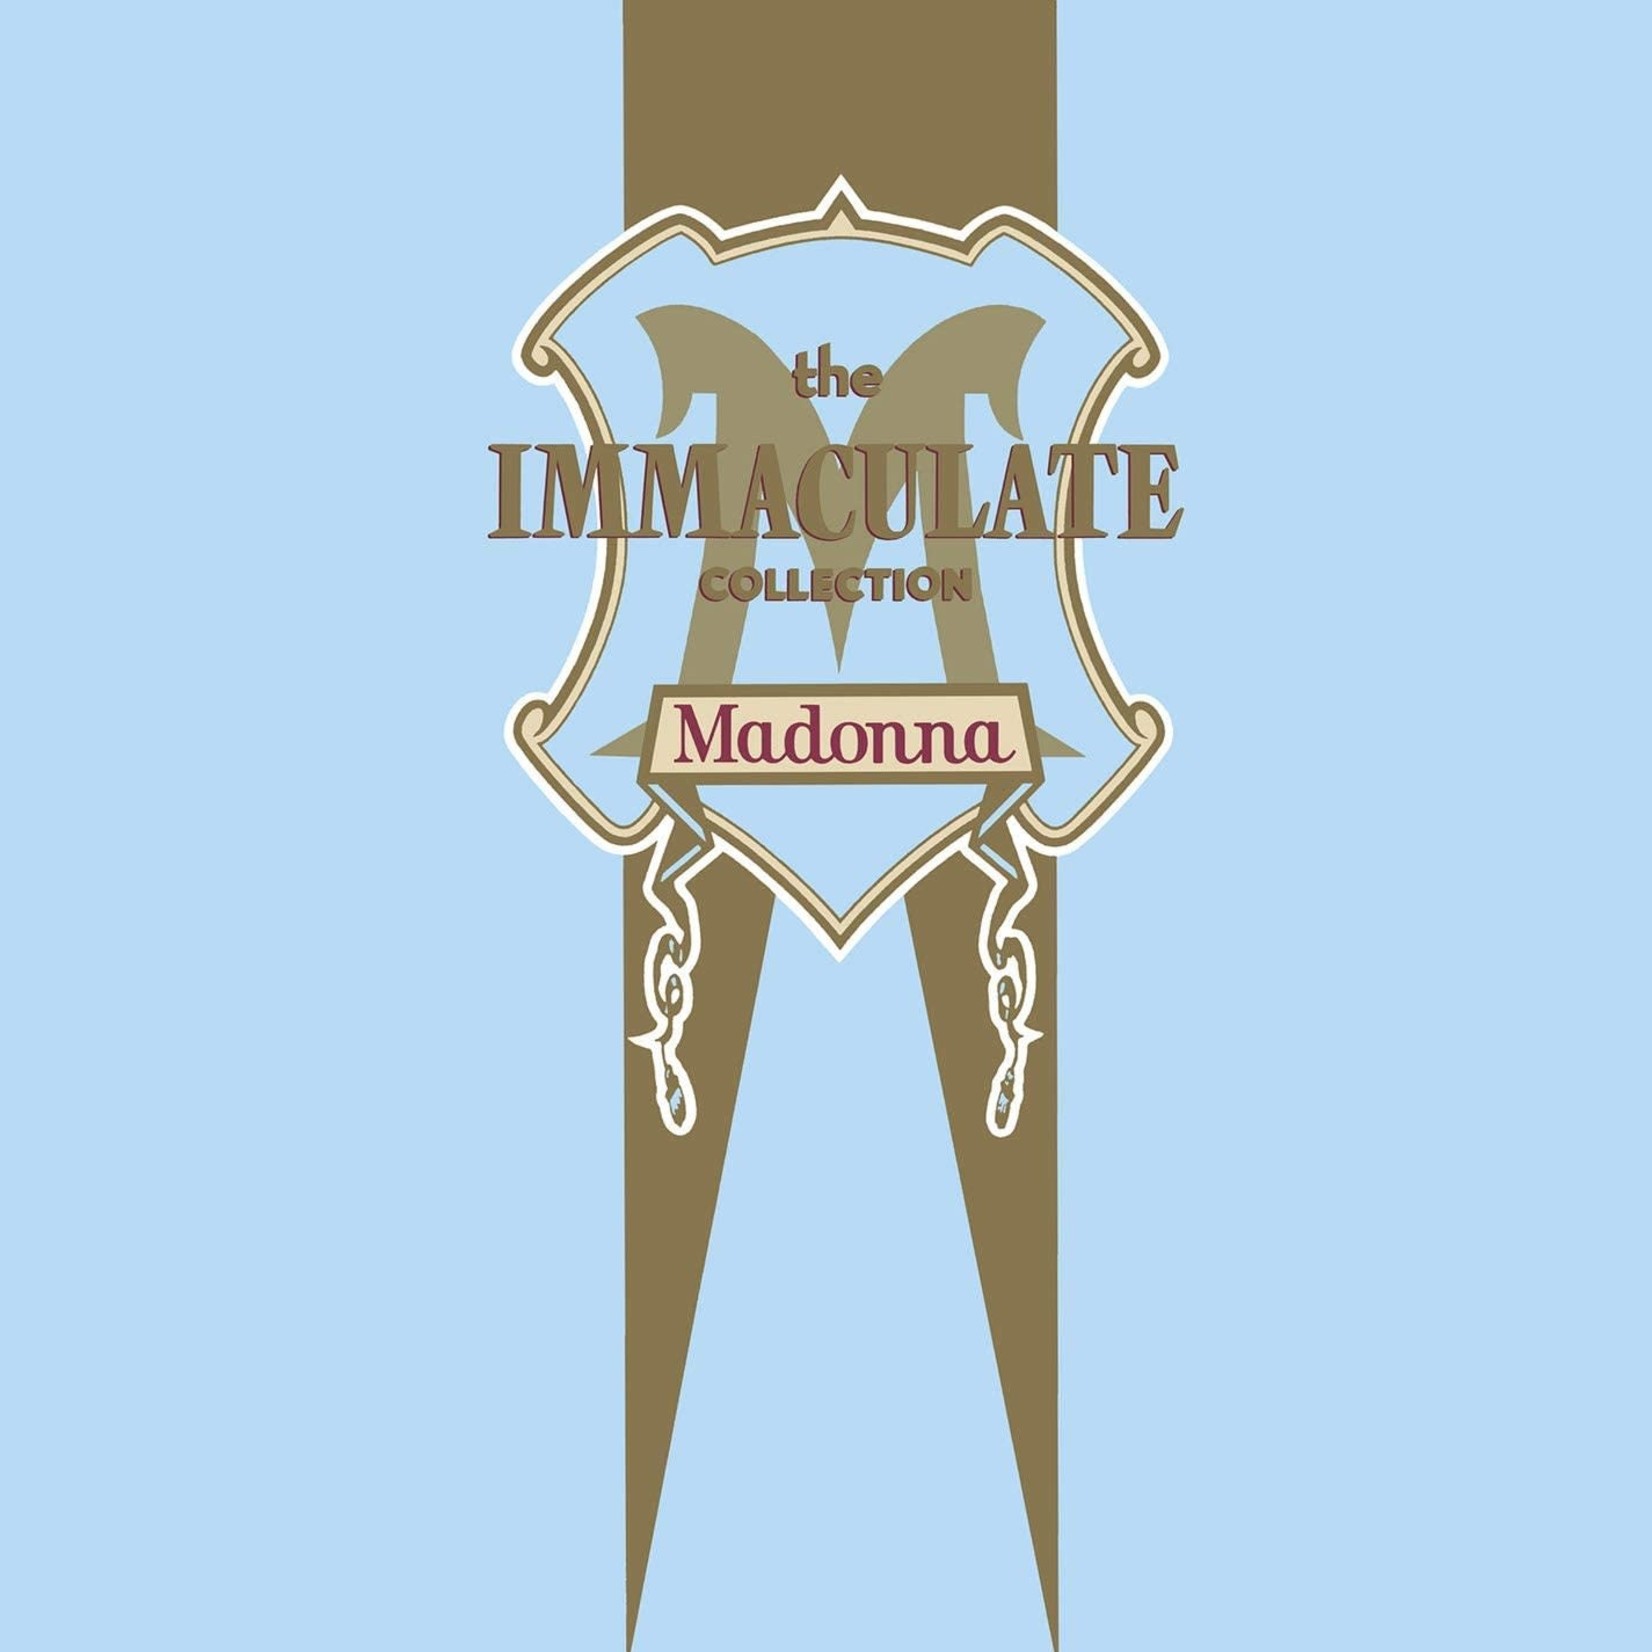 [New] Madonna - The Immaculate Collection (2LP)